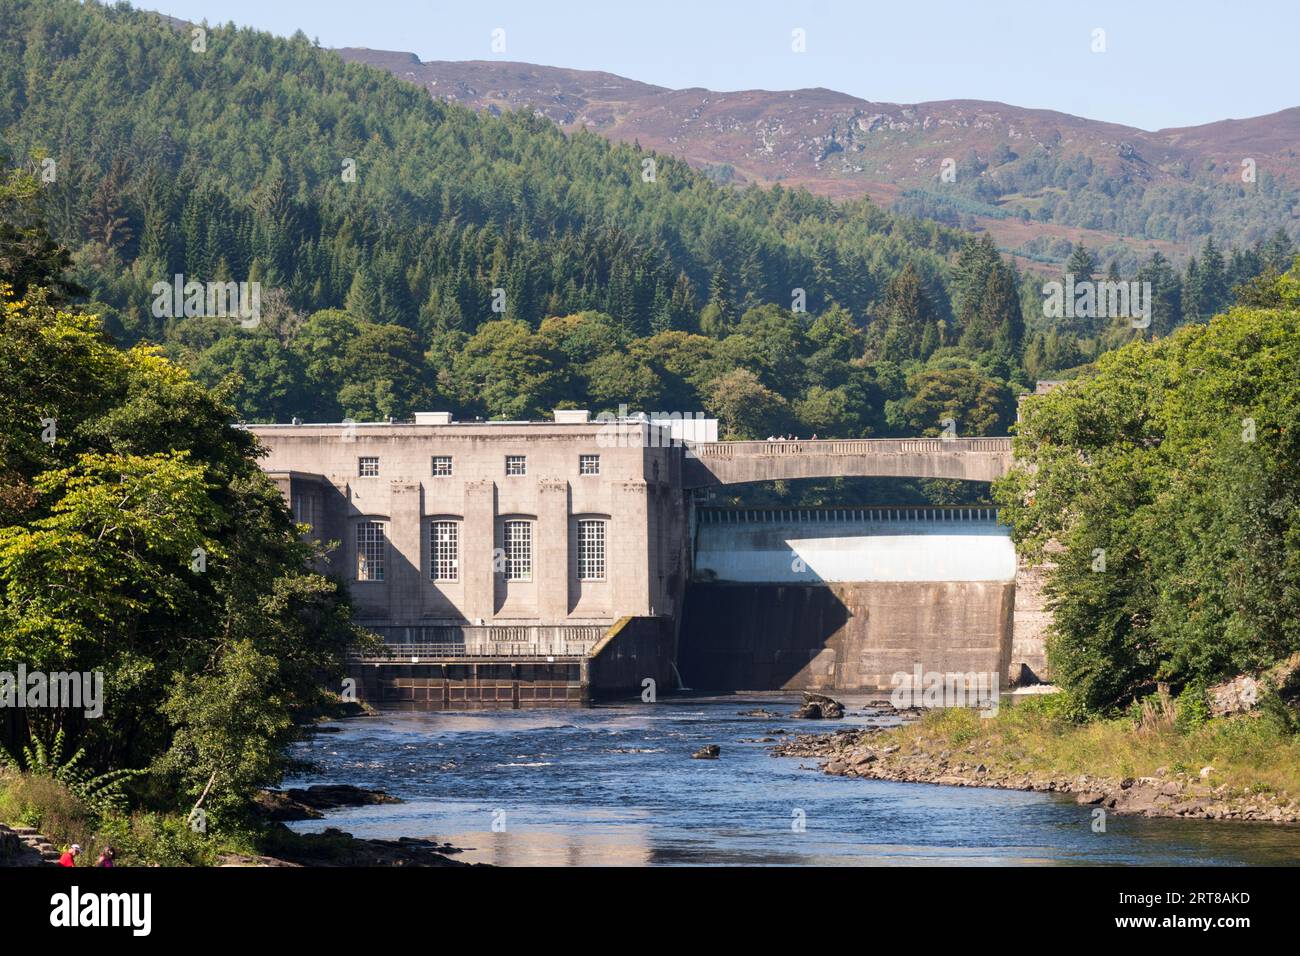 Pitlochry hydro power station on the River Tummel in Scotland, UK Stock Photo